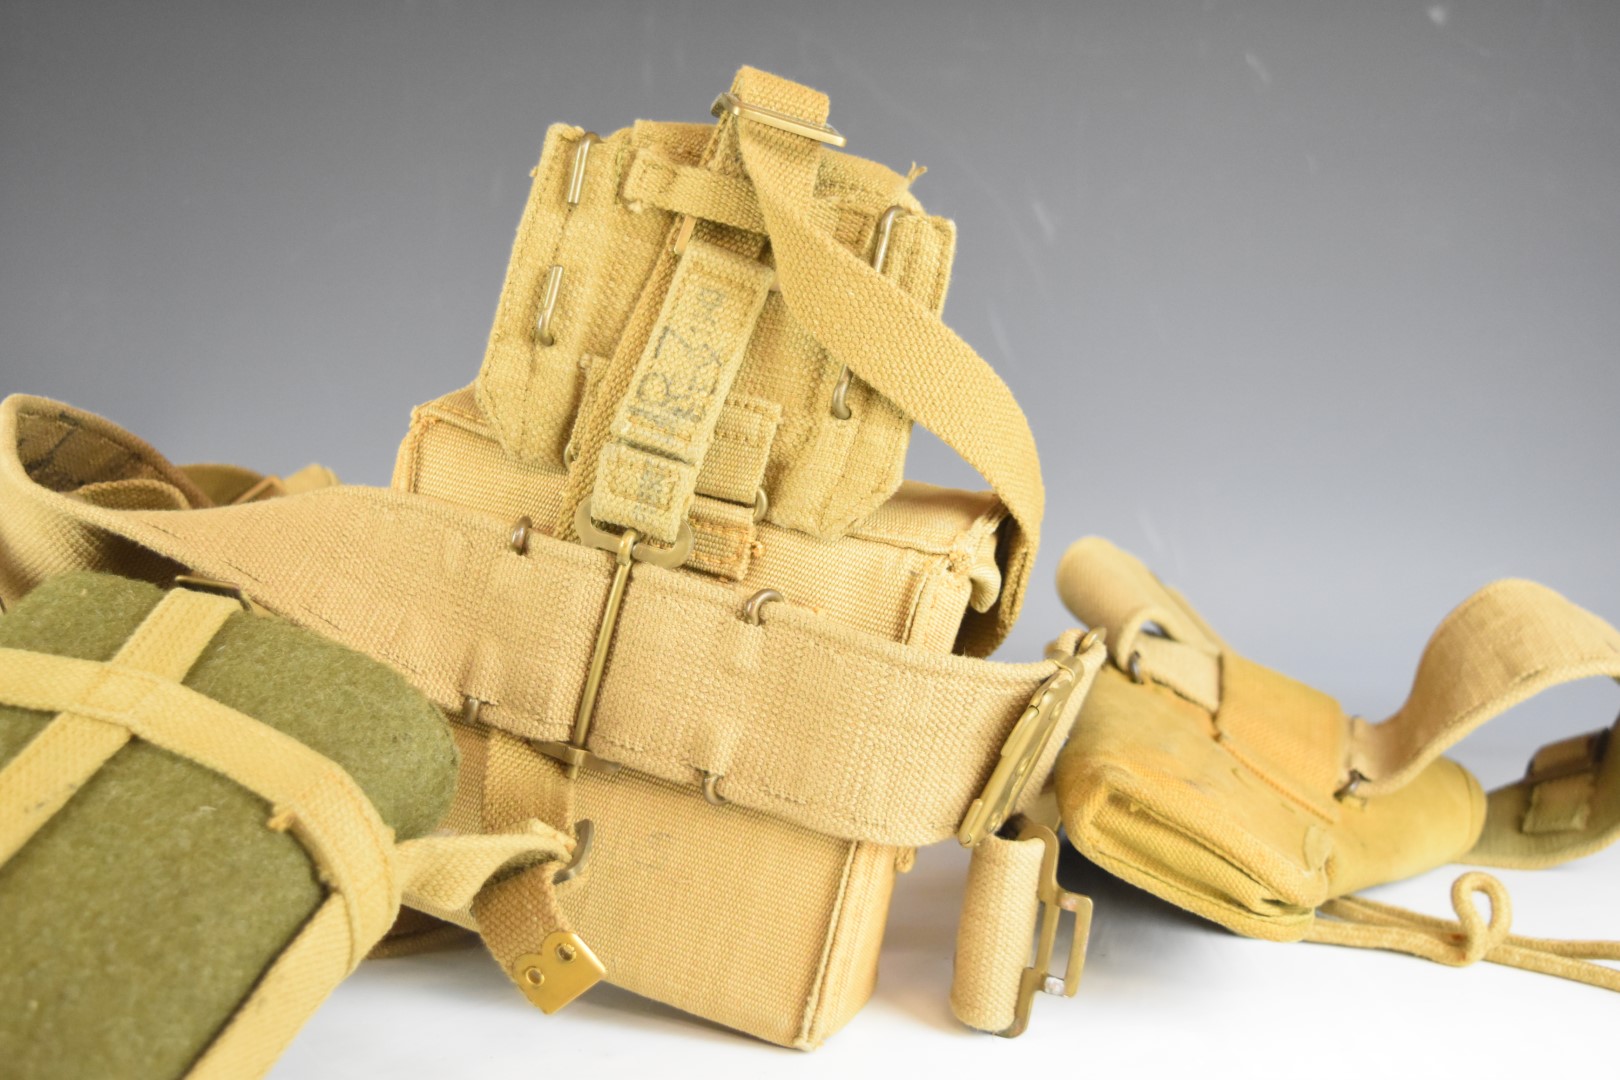 British WW2 webbing including ammunition pouches, belts, holsters, sling, lanyard and haversack, all - Image 9 of 11